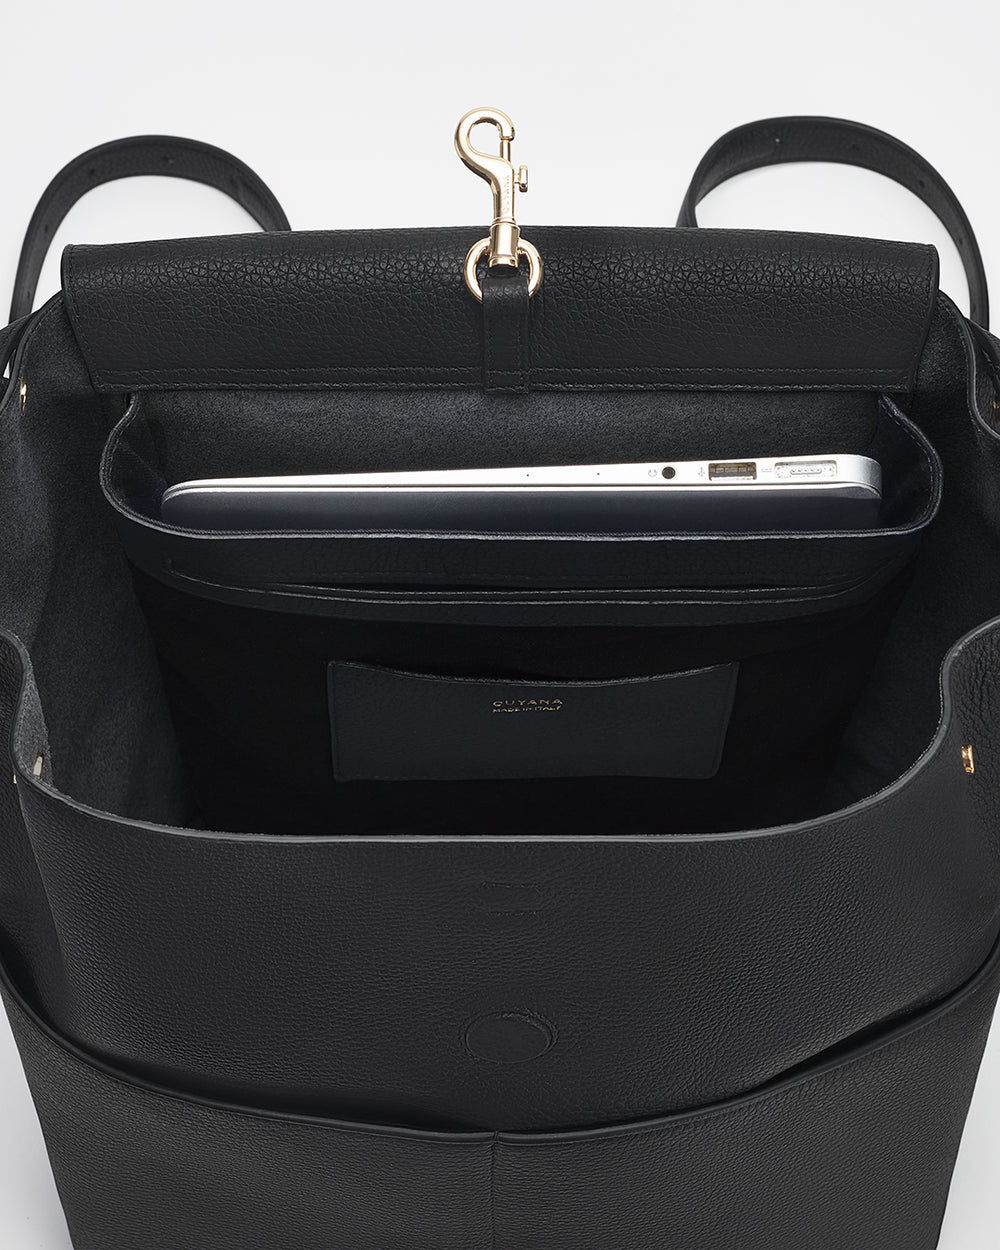 Open bag with a laptop inside and a clasp on the top.